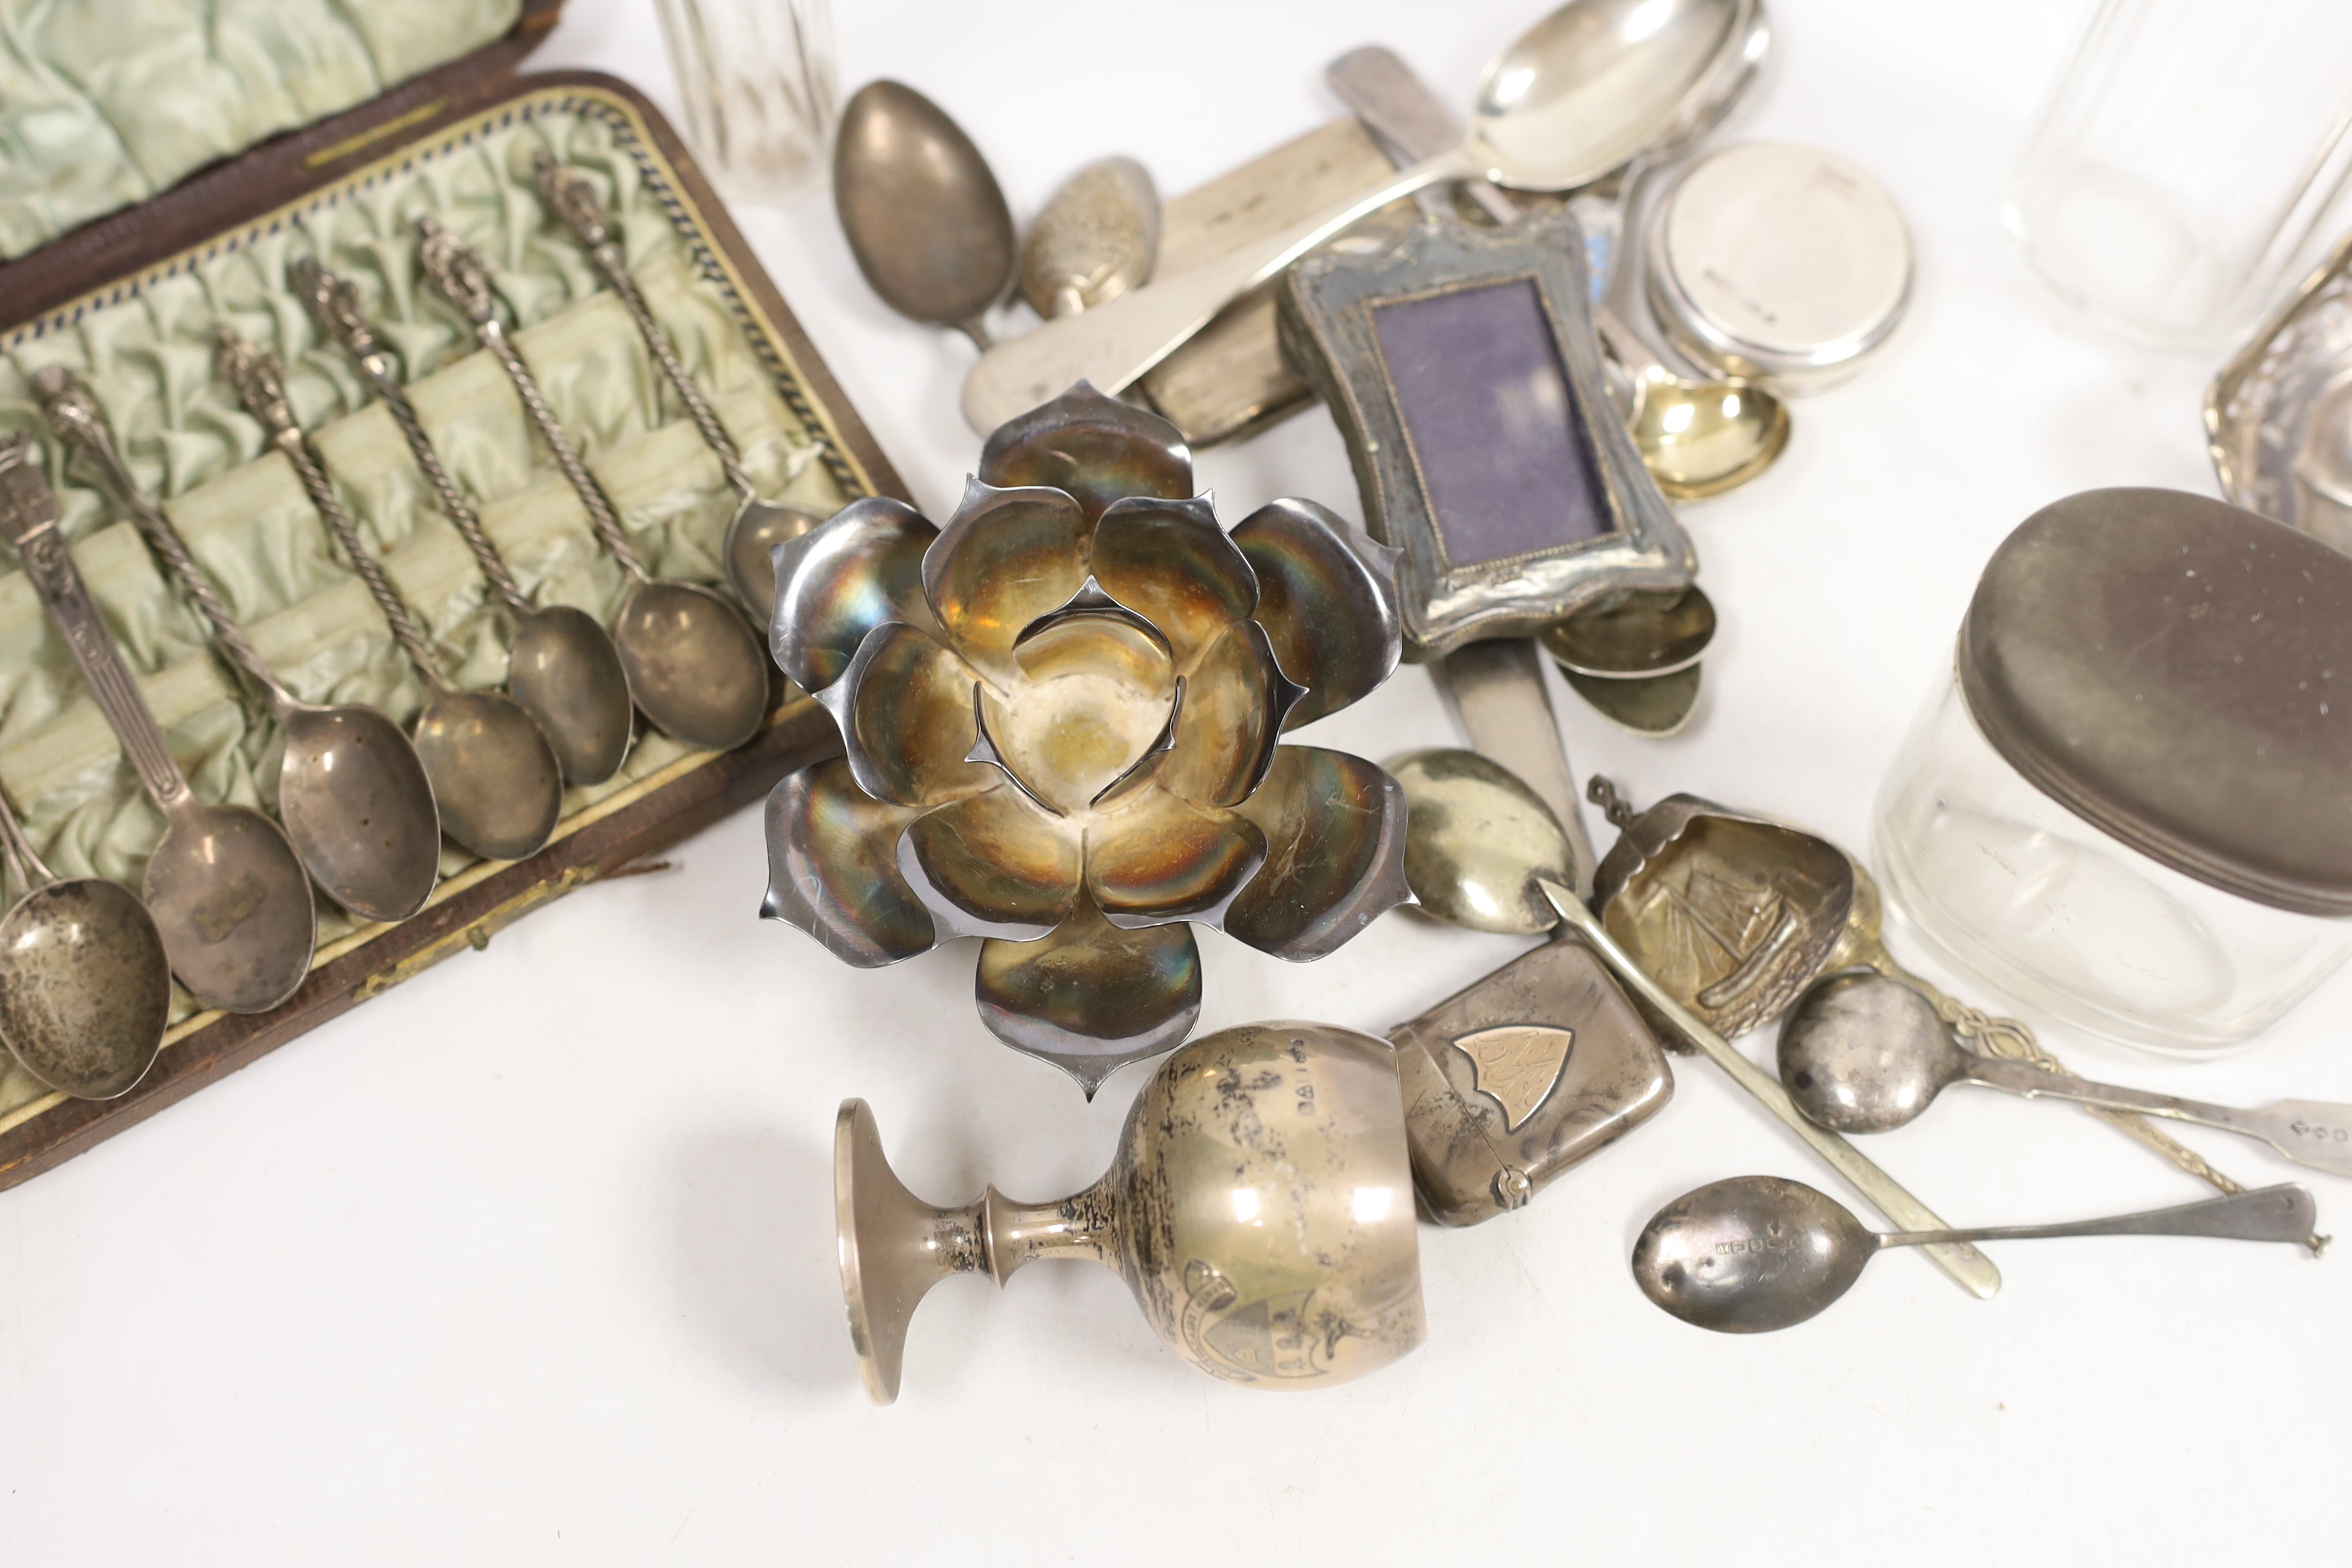 Sundry small silver and sterling items including teaspoons, hanging basket, goblet, miniature - Image 3 of 4